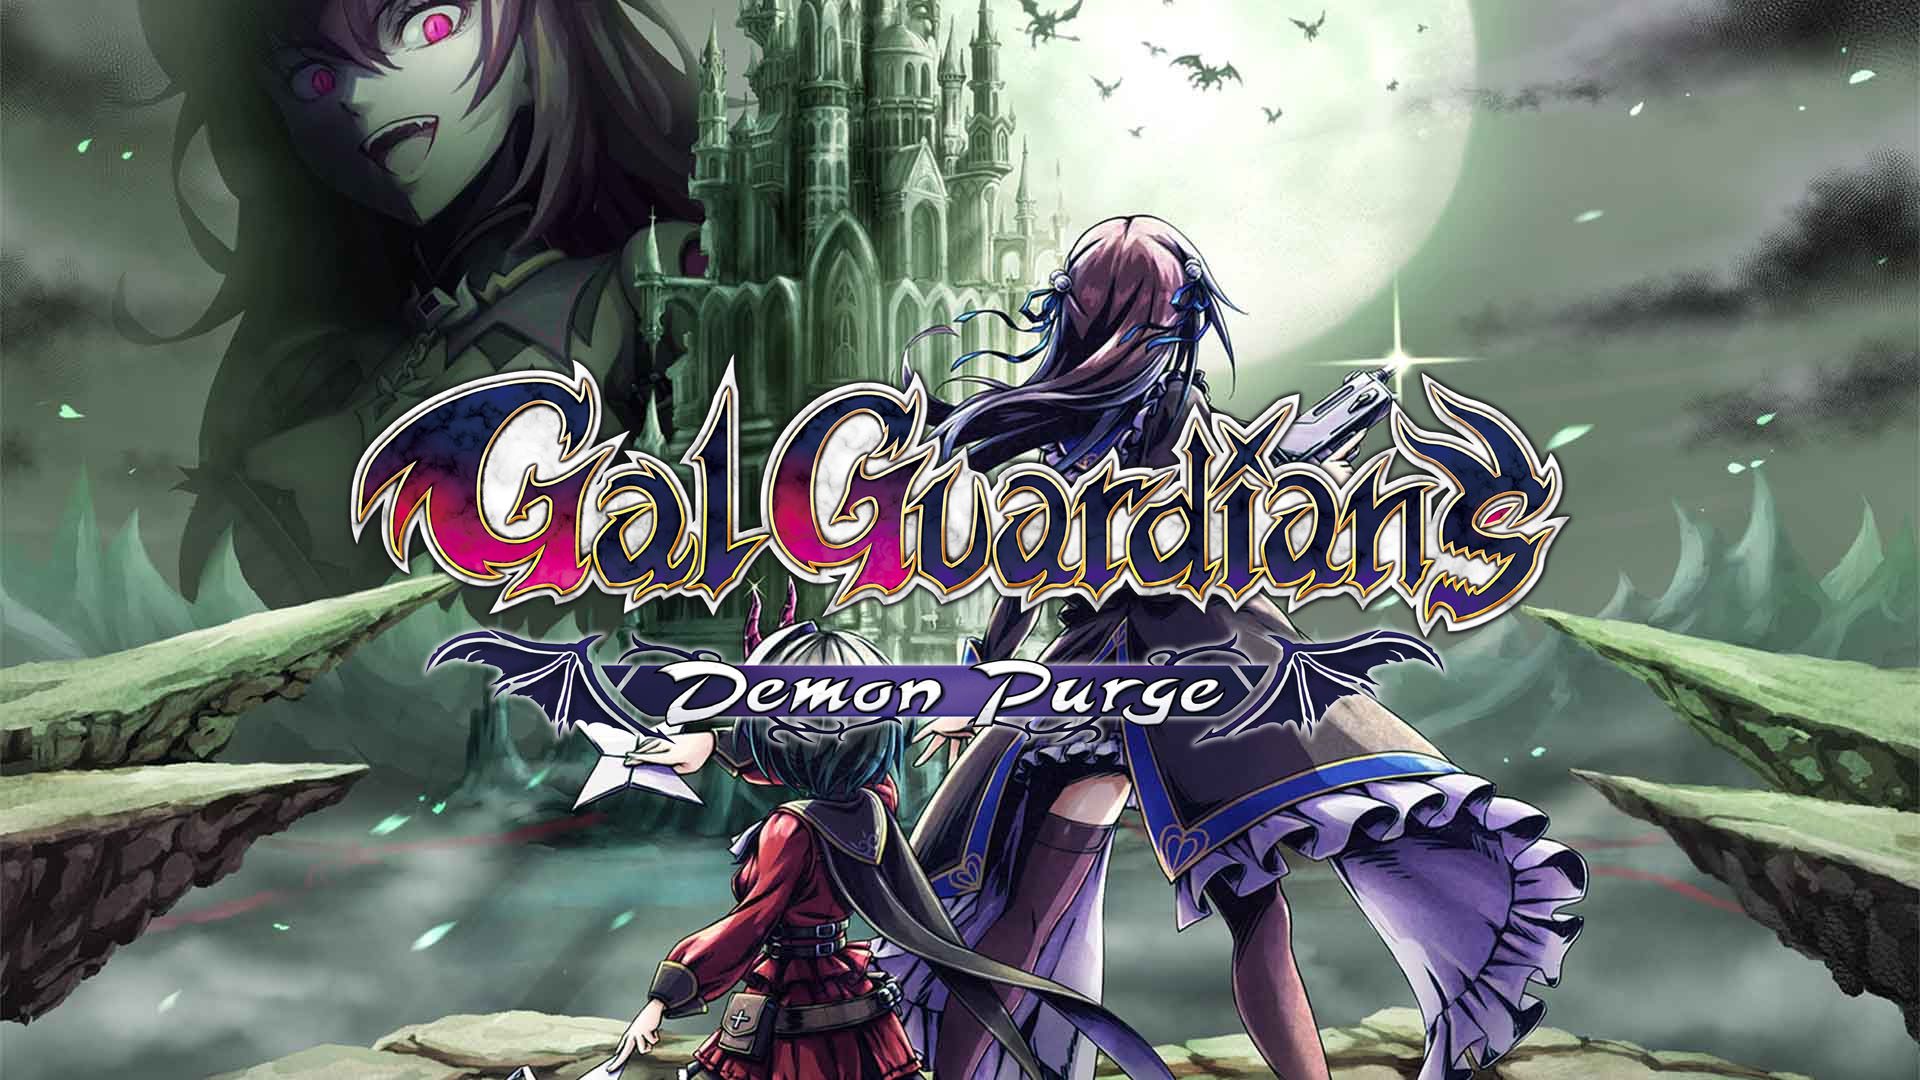 Grim Guardians is being rebranded to Gal Guardians over a trademark dispute